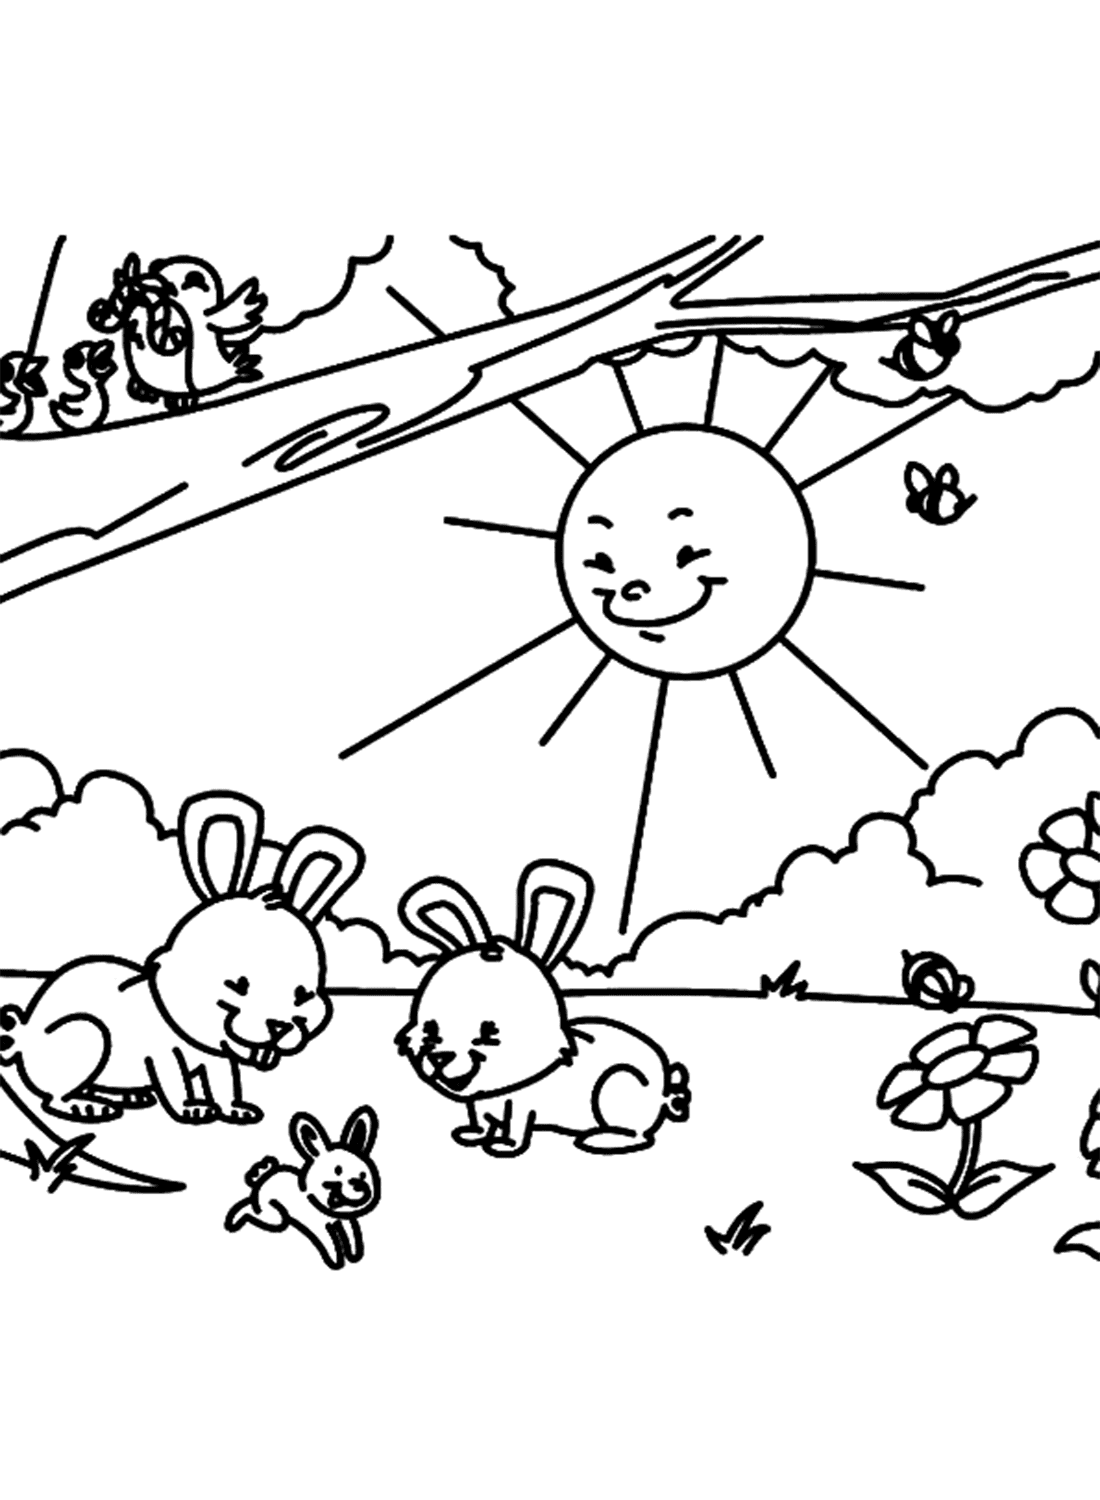 Rabbits in Spring Coloring Pages